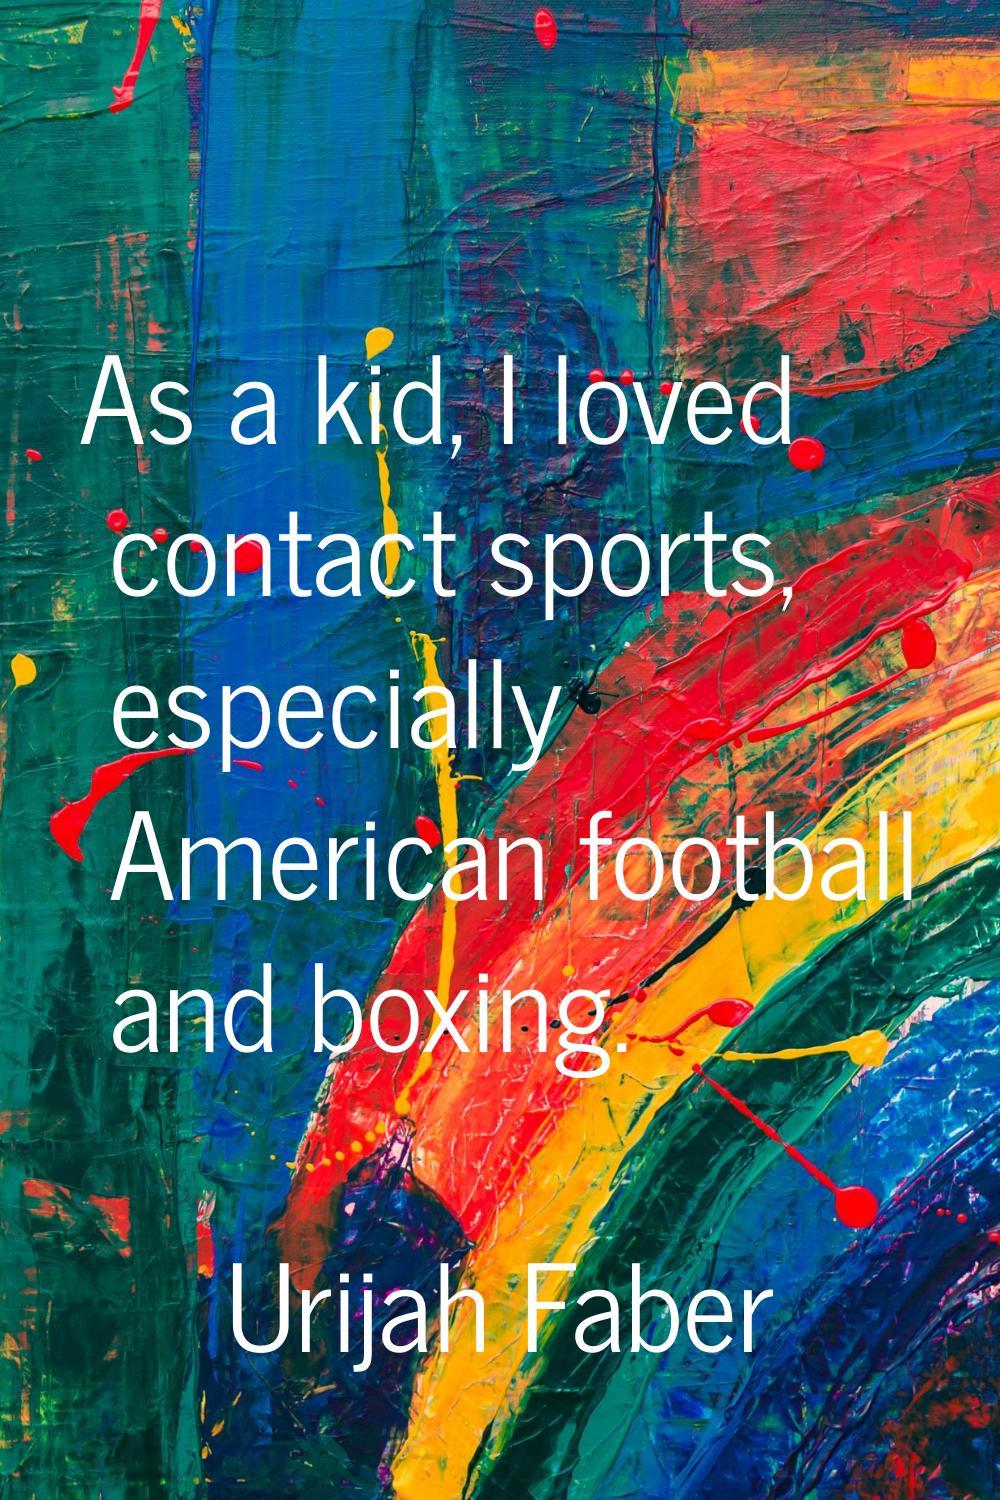 As a kid, I loved contact sports, especially American football and boxing.